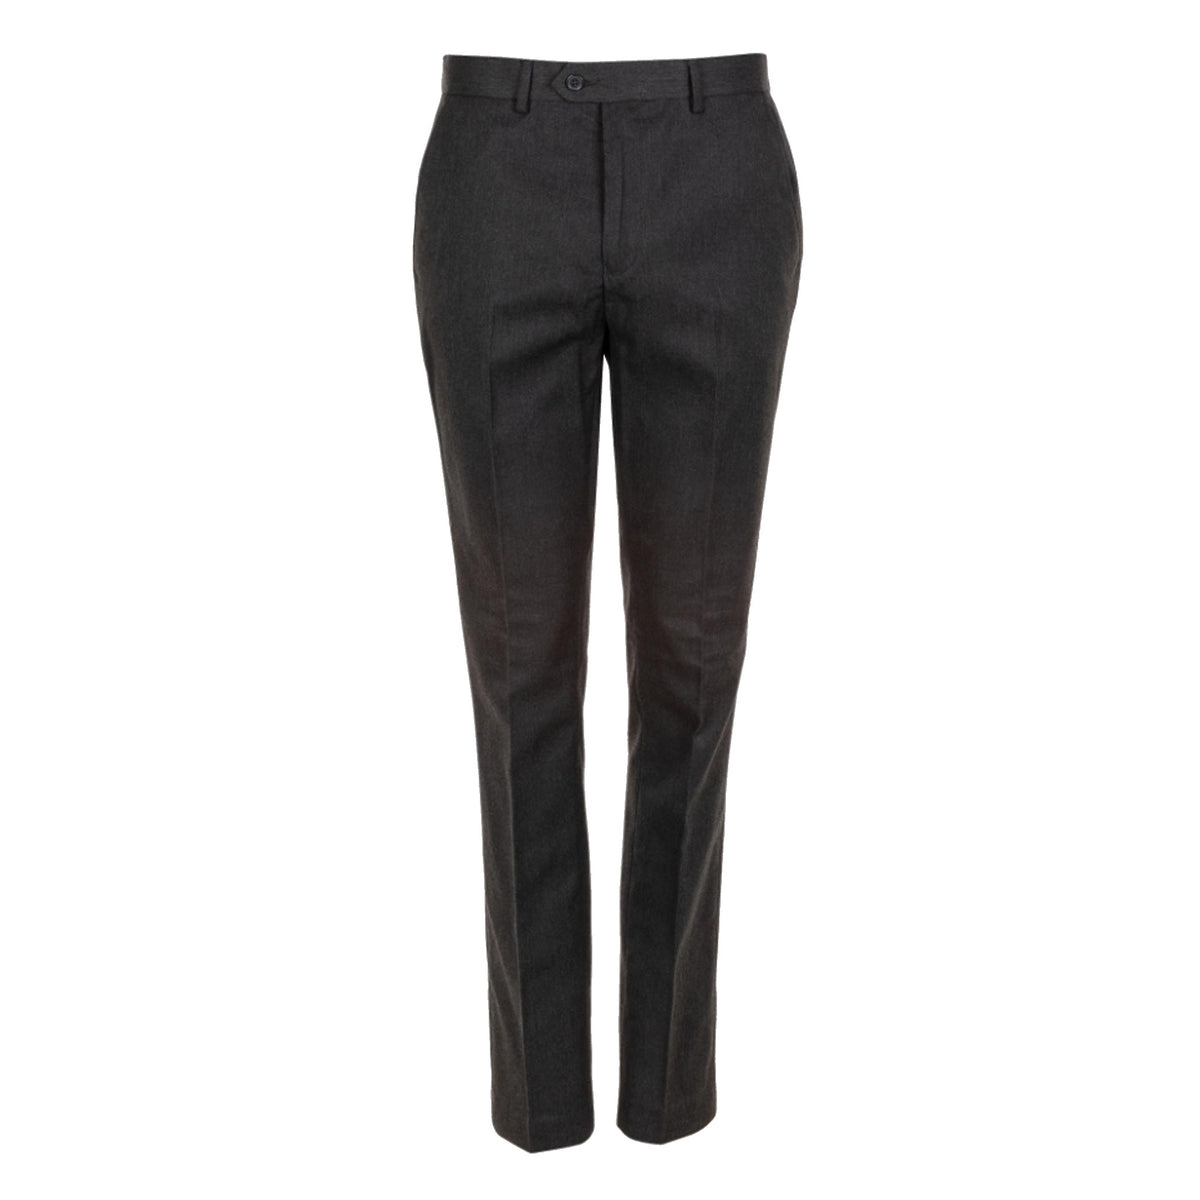 Boys Tapered Fit Trouser BT4: Charcoal